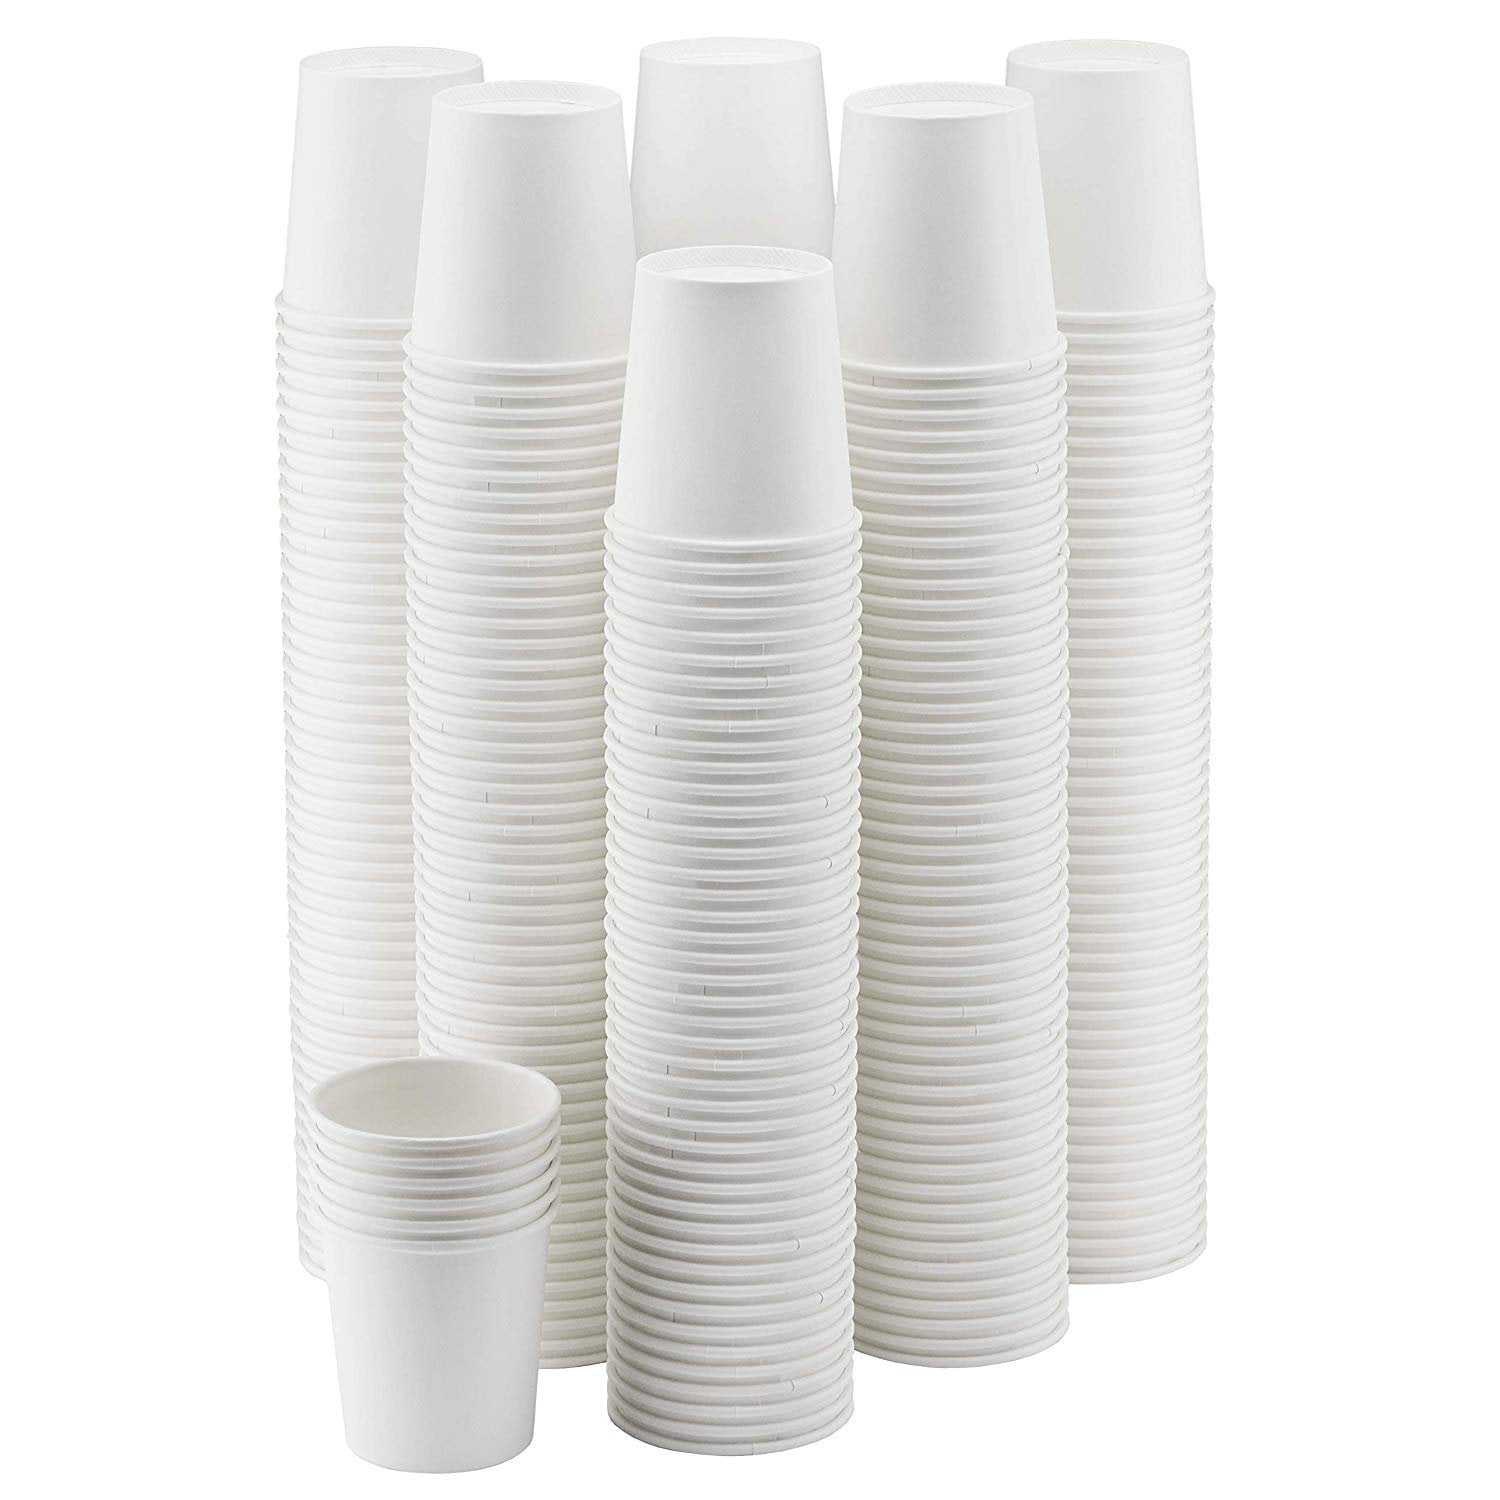 NYHI 300Pack 4 oz. White Paper Disposable Cups Hot/Cold